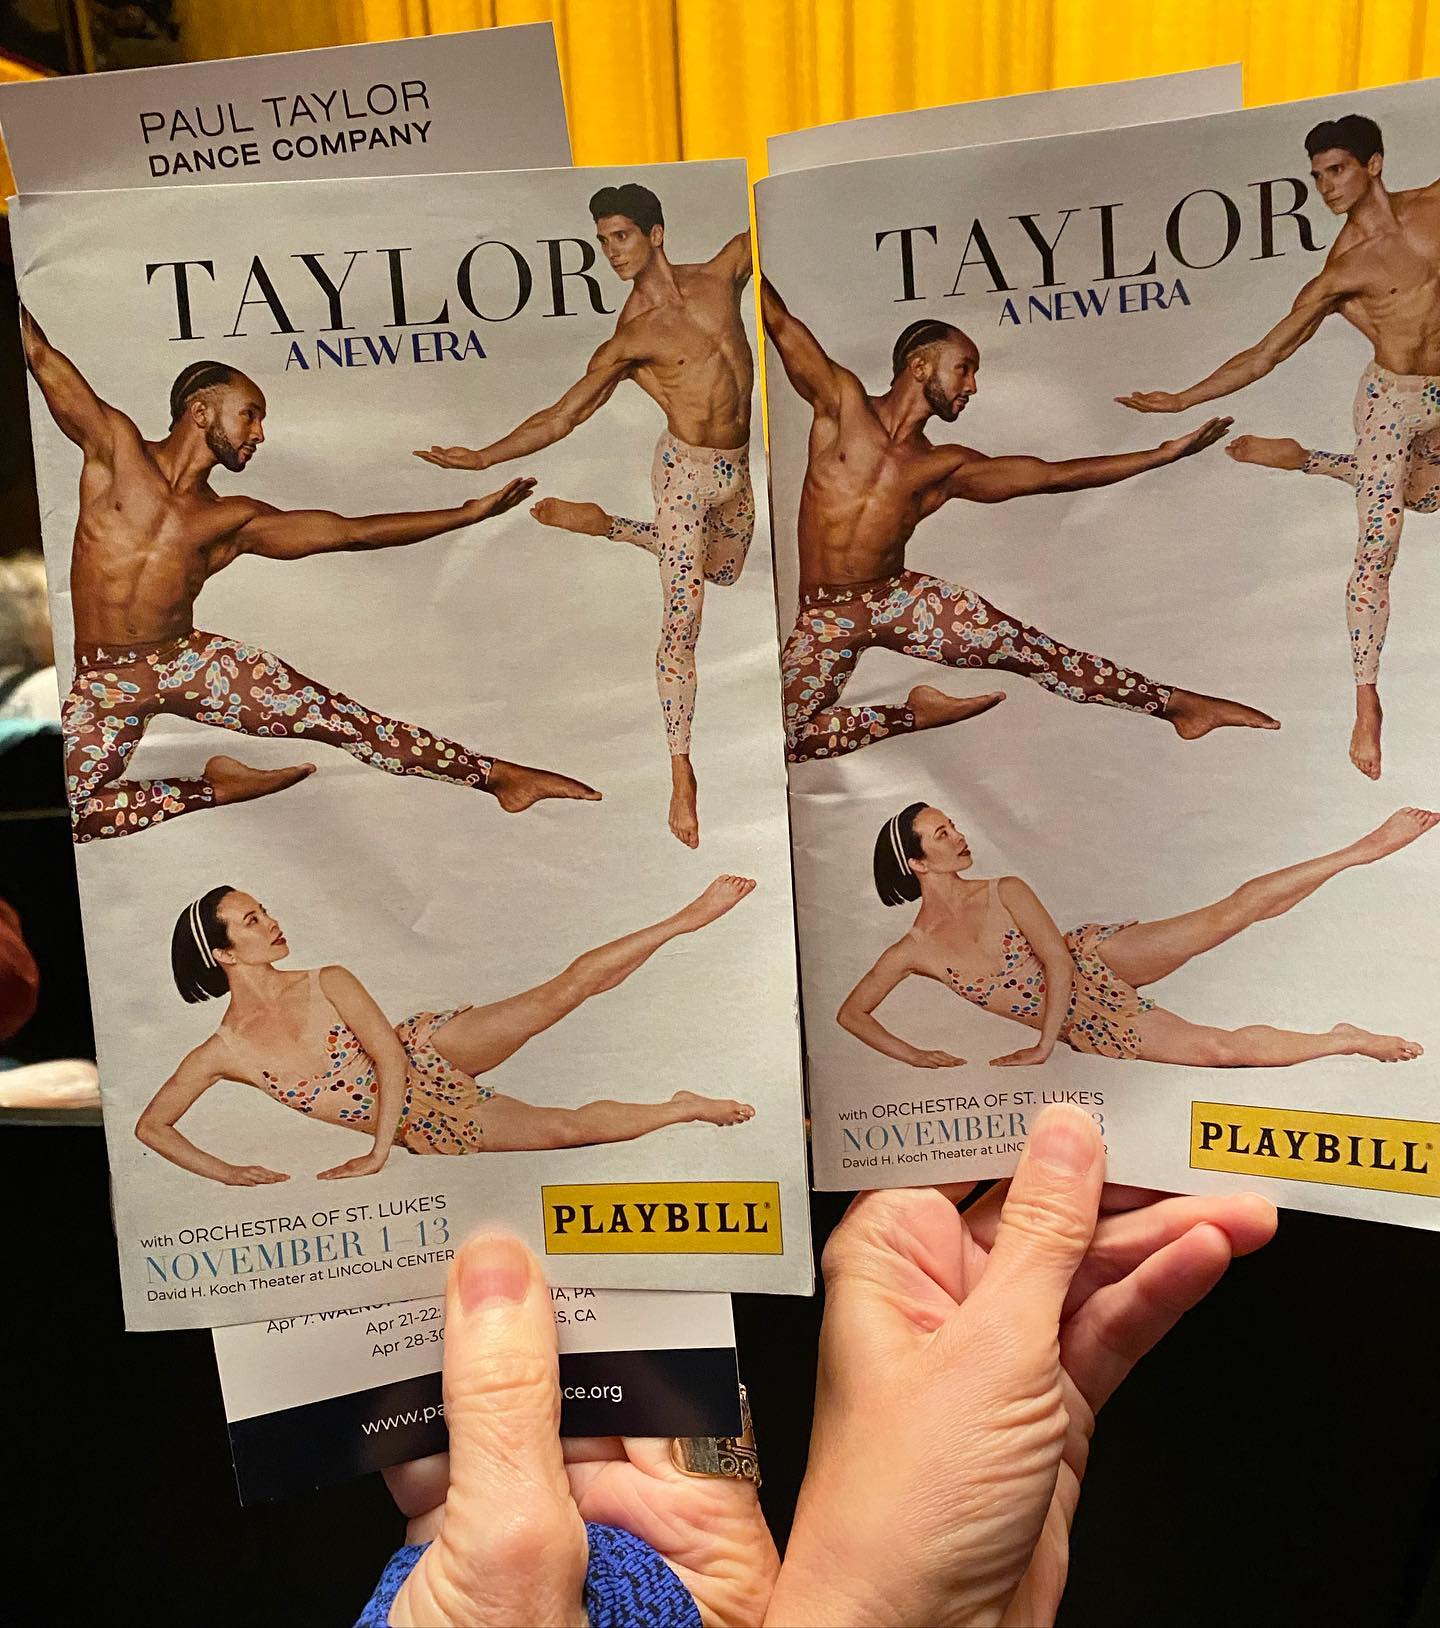 Lovely dinner for 3 @cafeluxembourg followed by 2 of us taking in @paultaylordance @lincolncenter Energetic, vibrant, elevated dance, and just a great evening of art and conversation! #paultaylordancecompany #moderndance #choreography #lincolncenter #uws #dinnerwithfriends #dance #dancersinspiration #ilovedance